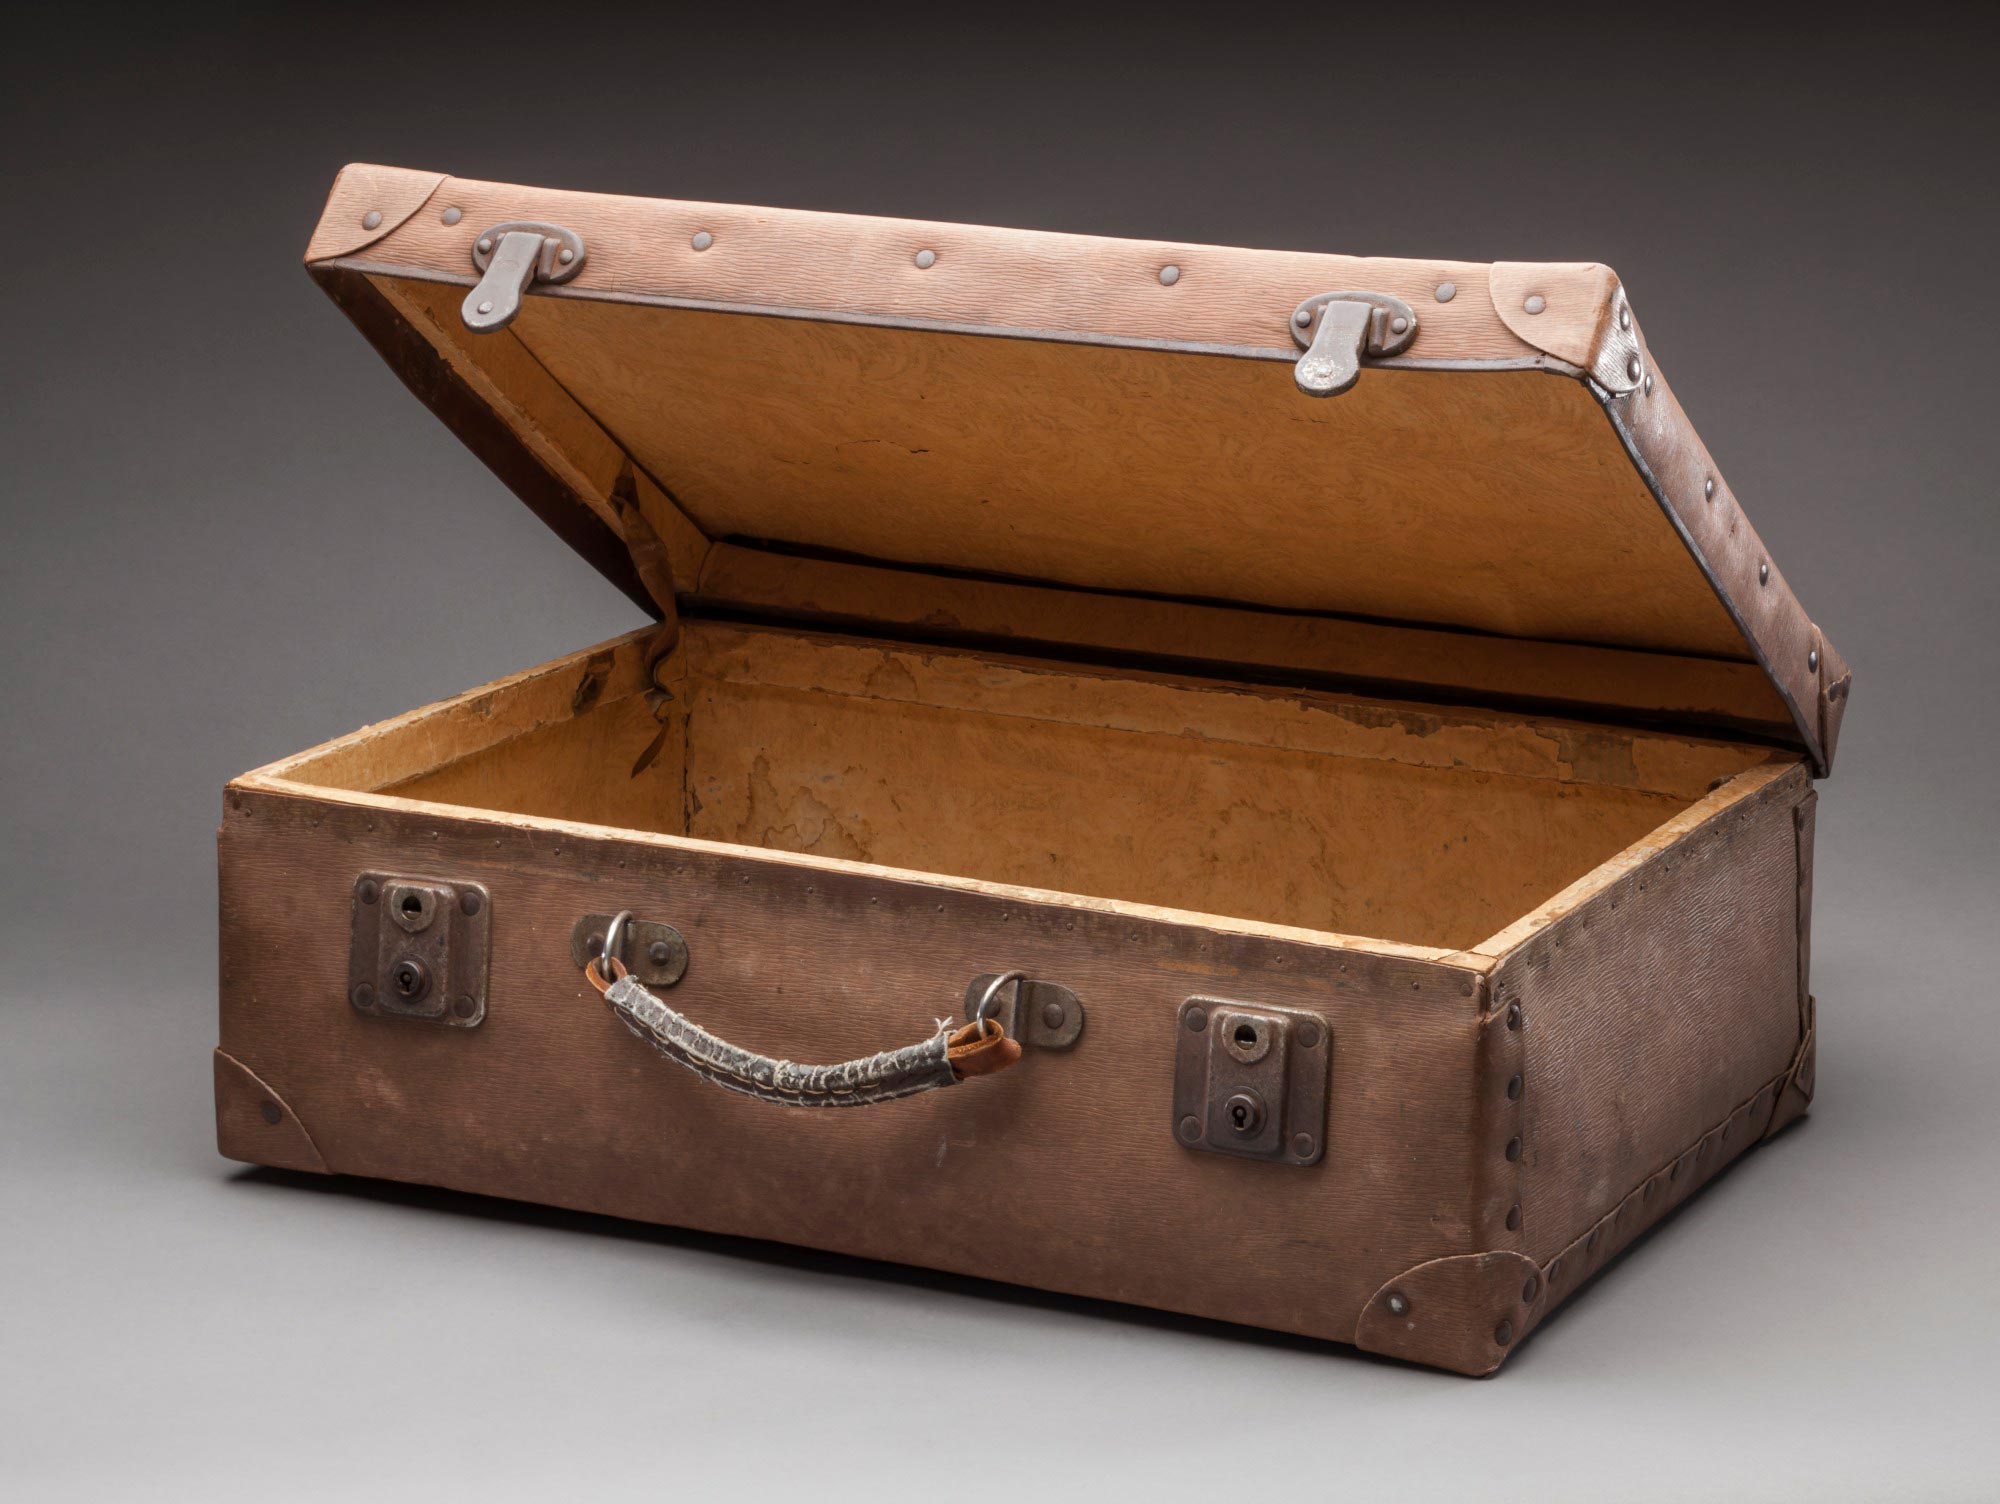 Small brown vinyl suitcase used to transport Mungo Lady’s remains to Canberra.